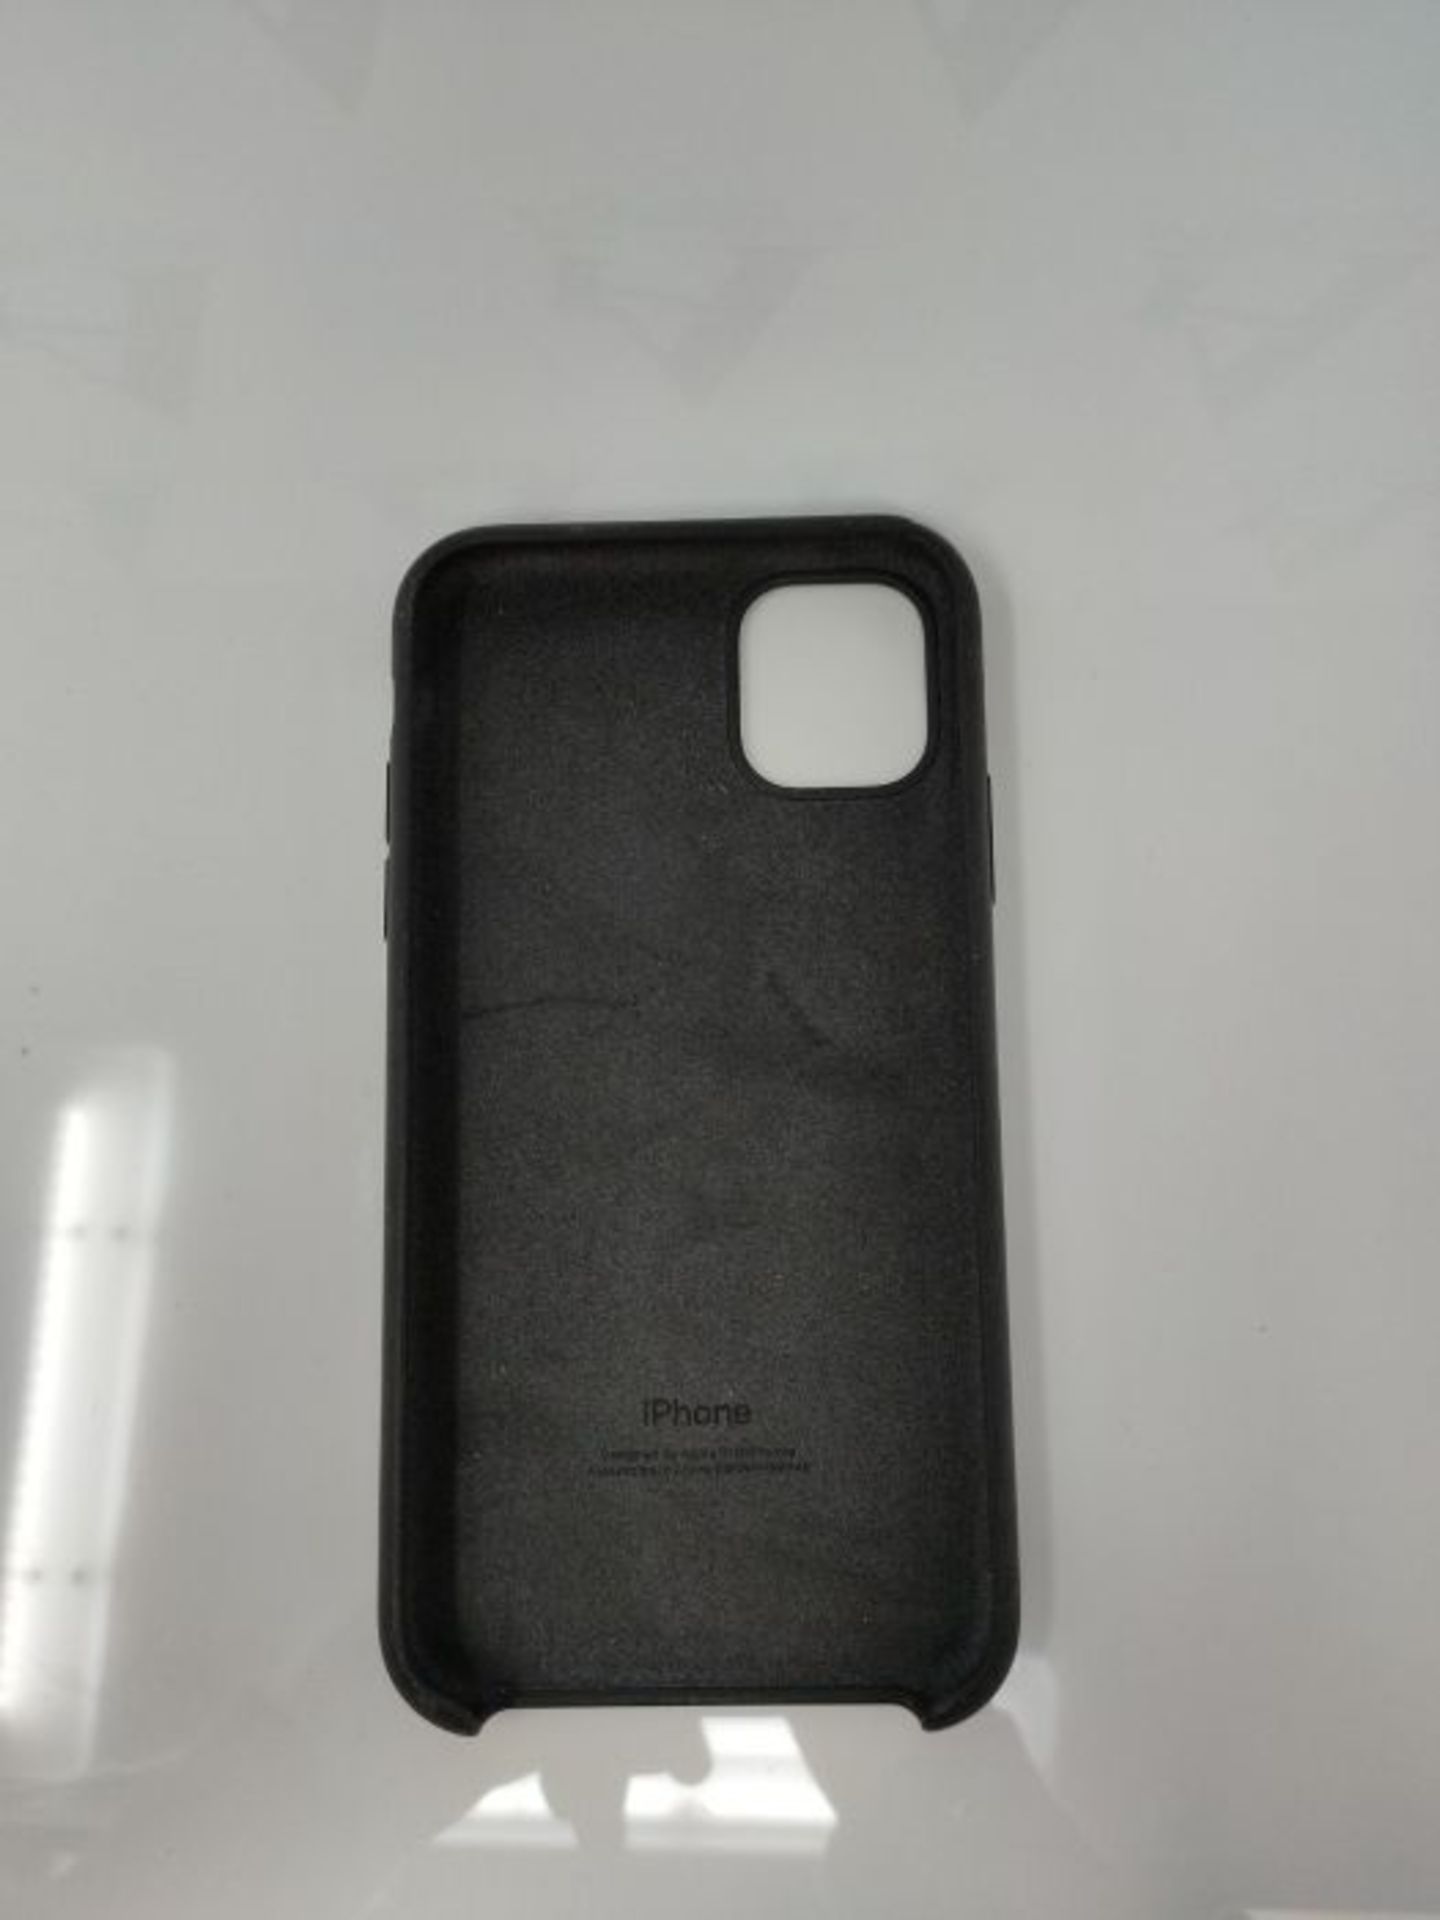 Apple Silicone Case (for iPhone 11) - Black - 6.06 inches - Image 2 of 3